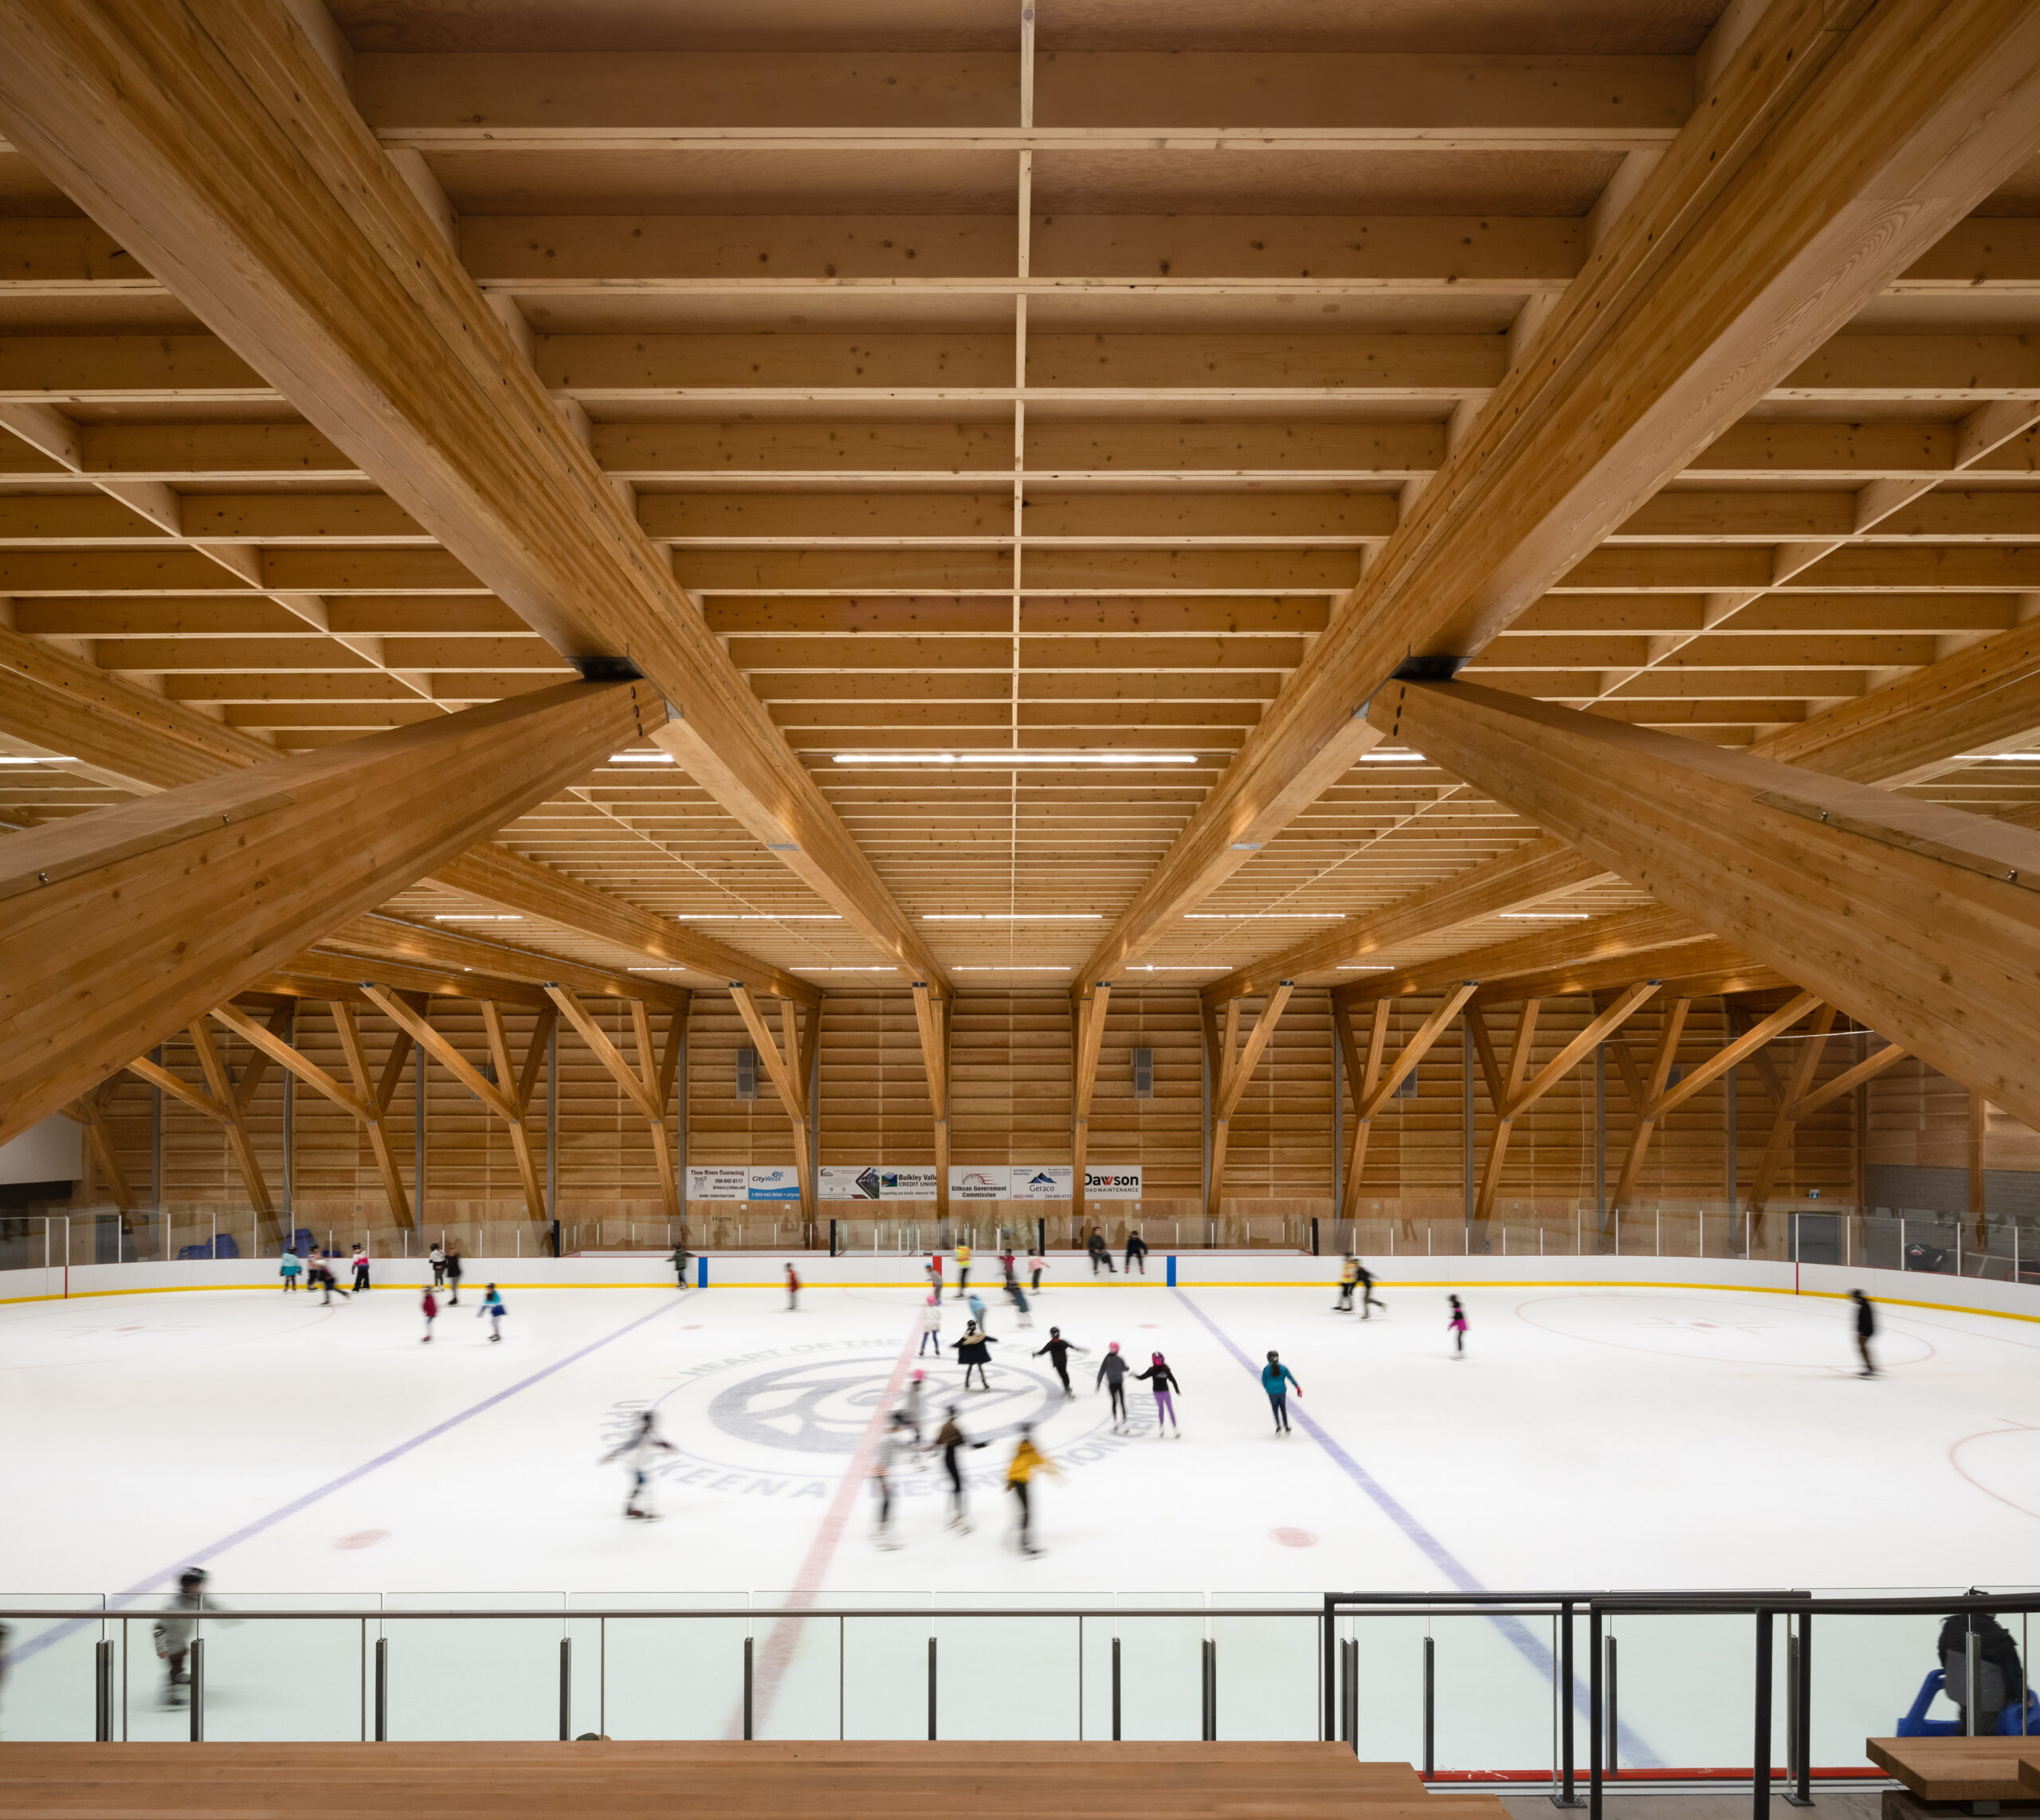 A view of skaters enjoying the ice rink below, with the stunning glulam structure spanning overhead.